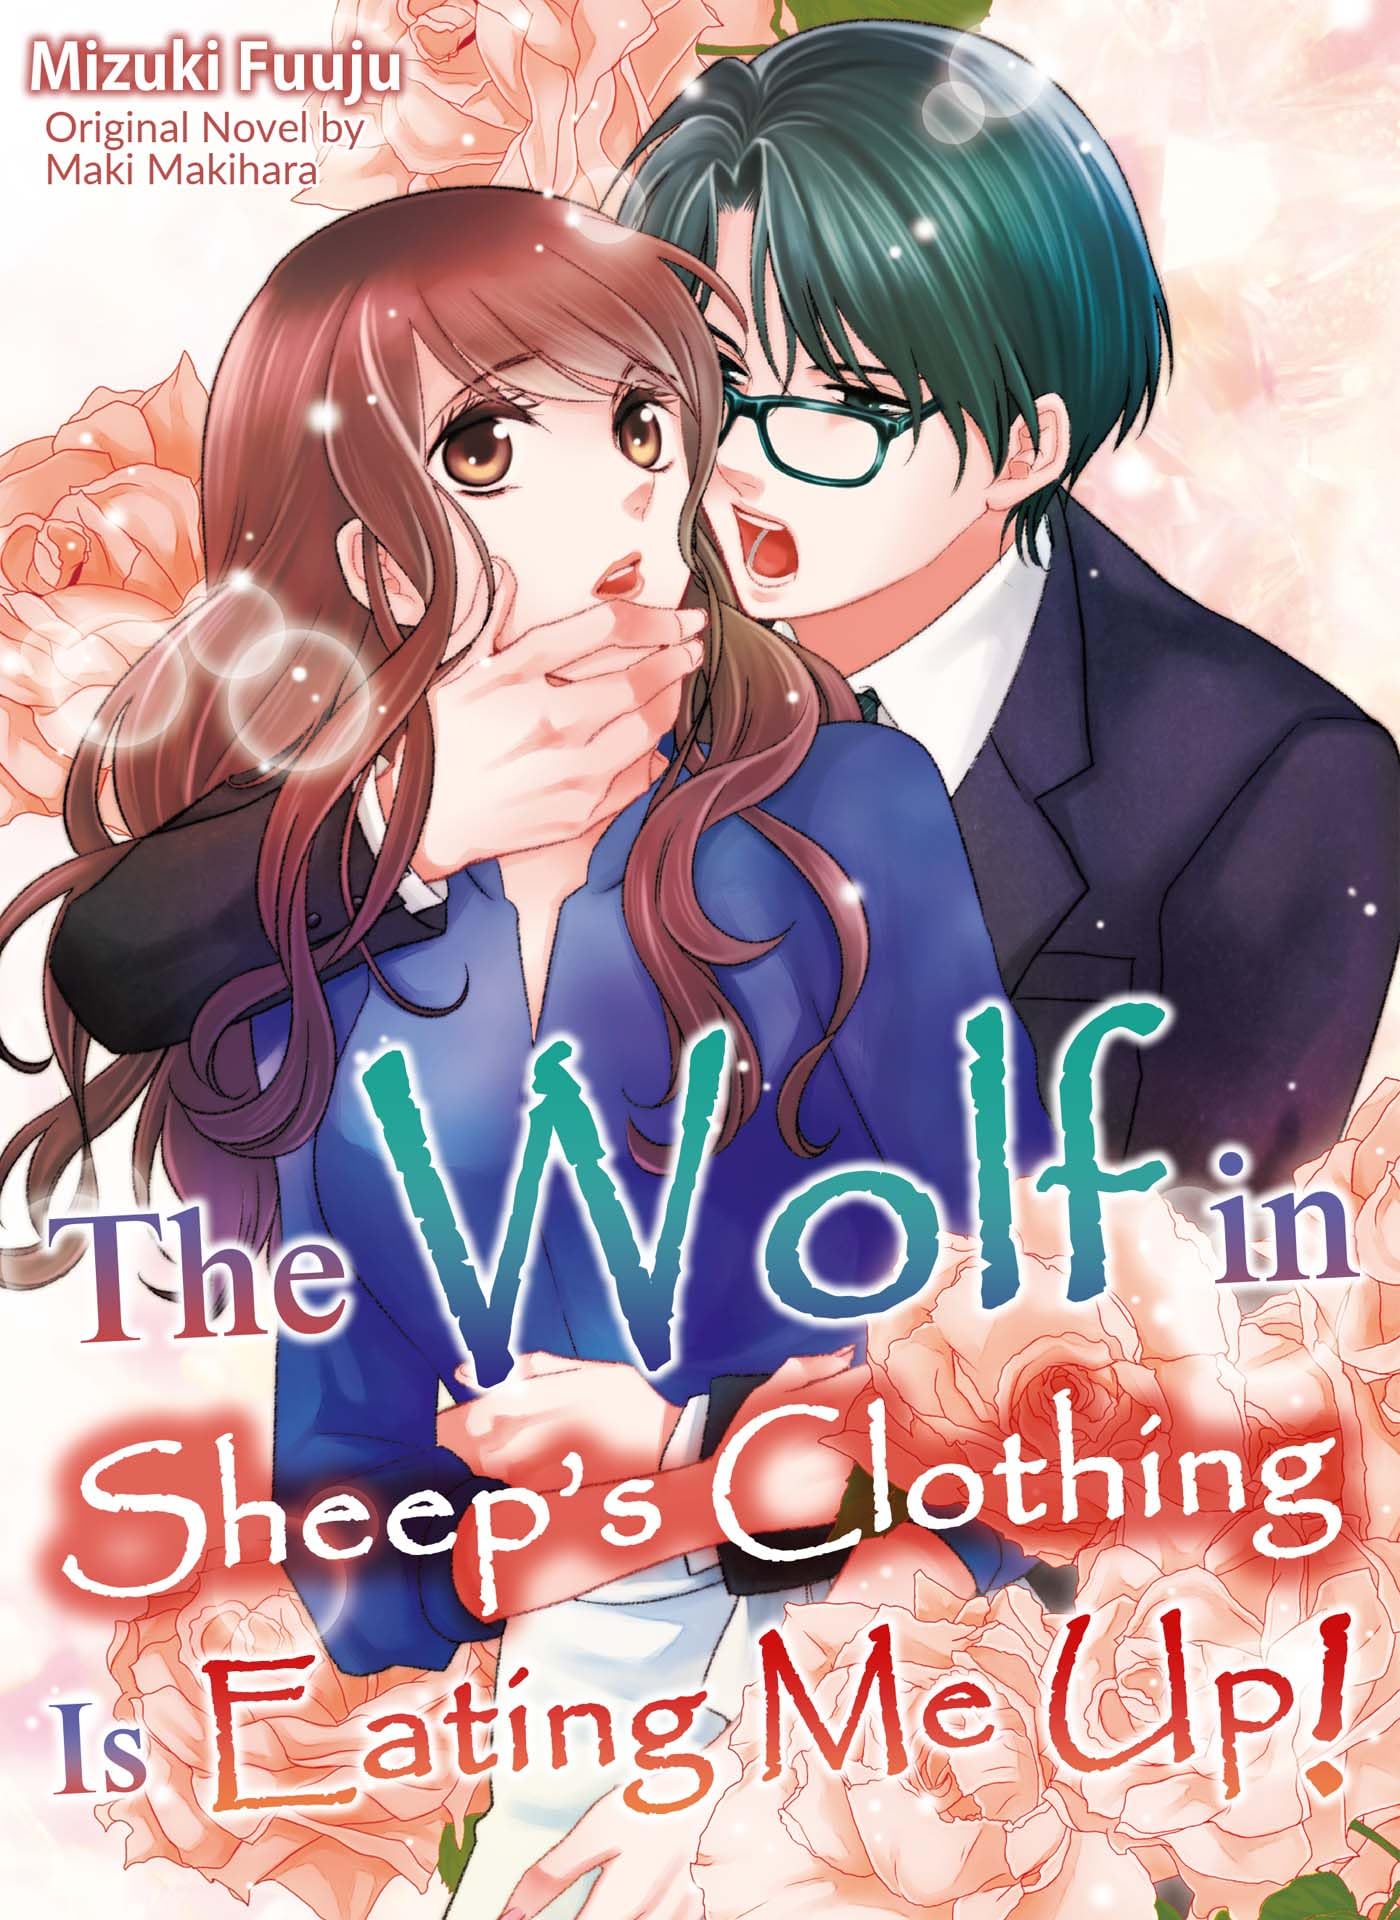 The Wolf in Sheep’s Clothing Is Eating Me Up!